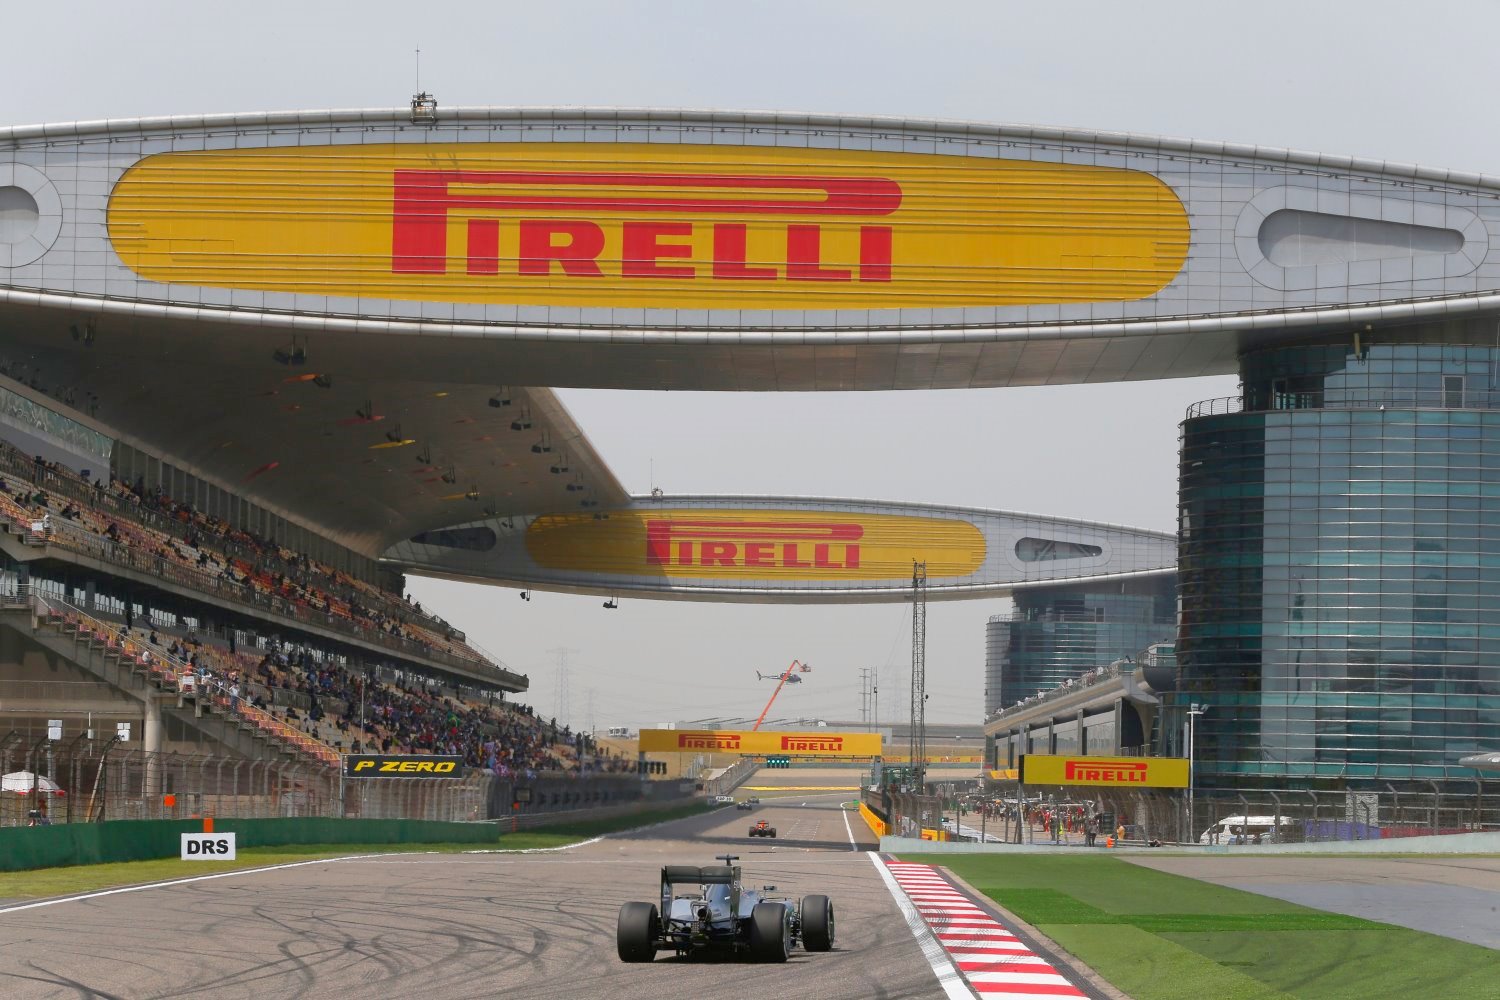 Looking up the front straight in Shanghai - hopefully it is long enough for DRS to create passes. i.e. the car will be doing the passing not the driver, he just pushes the button